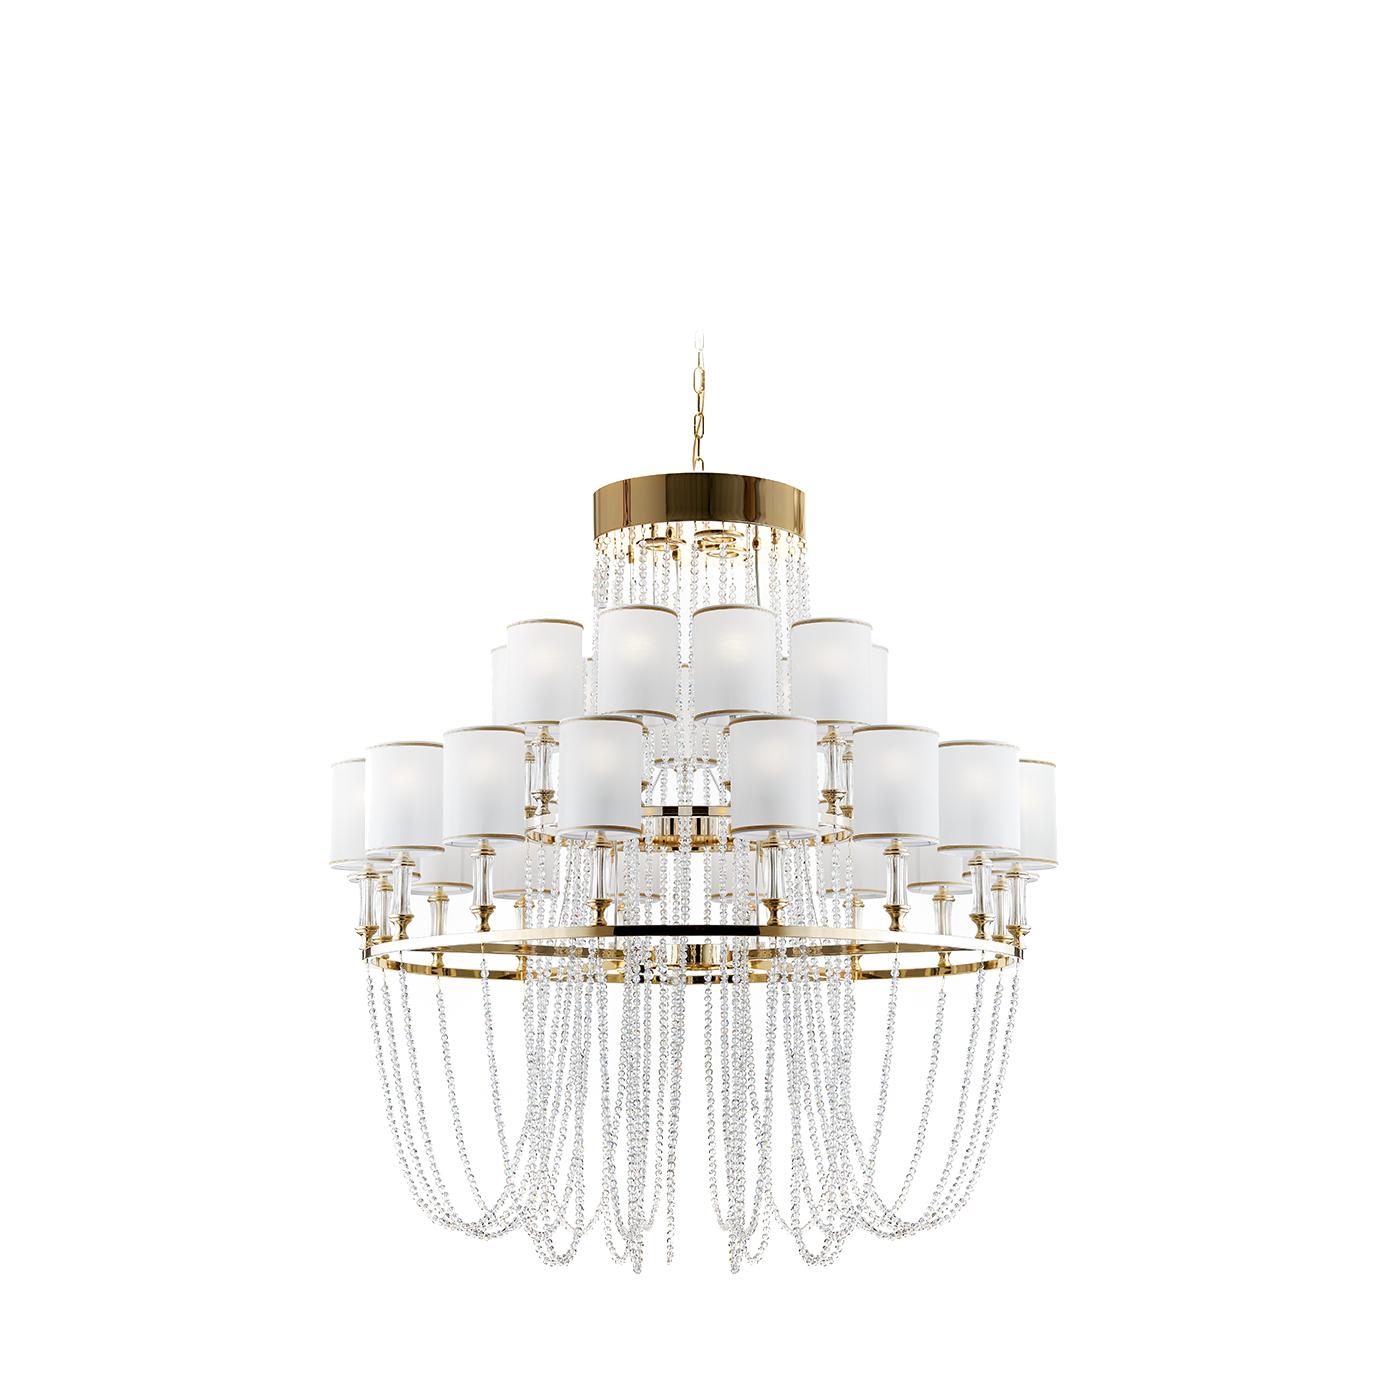 Part of the Ring collection, this exquisite chandelier is inspired by the Art Deco style and infused with romantic elements. The\nstructure in metal has a polished brass finish completed at the top with a small ring connected to two layered rings.